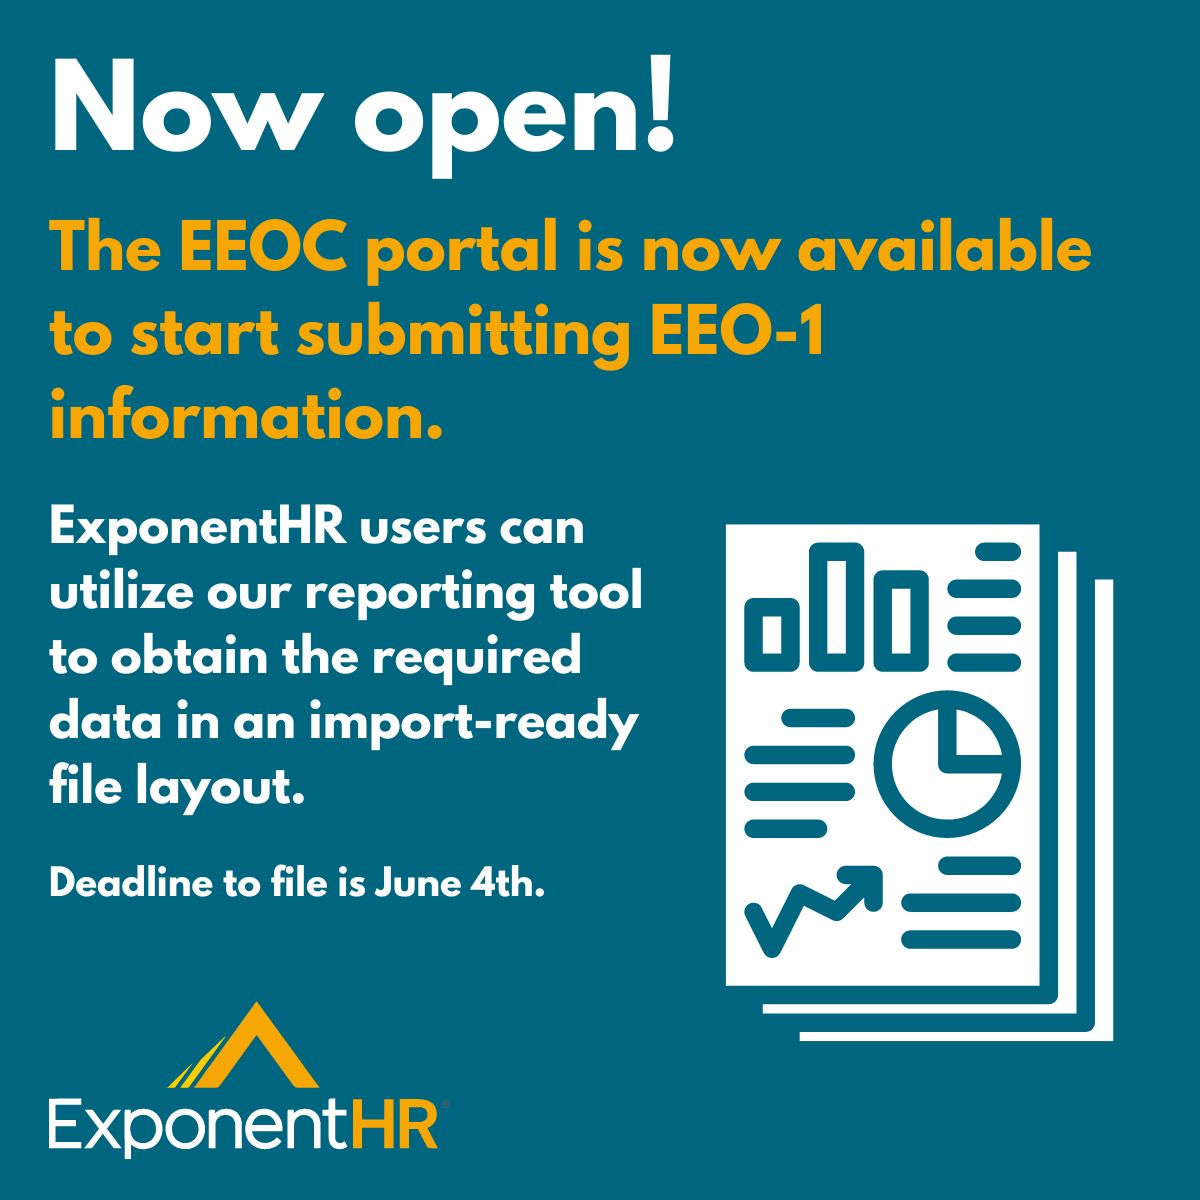 Deadlines matter! As an HCM company, we're committed to EEO compliance with precision and timeliness. Stay informed, stay compliant.
#EEO #HRCompliance #ExponentHR